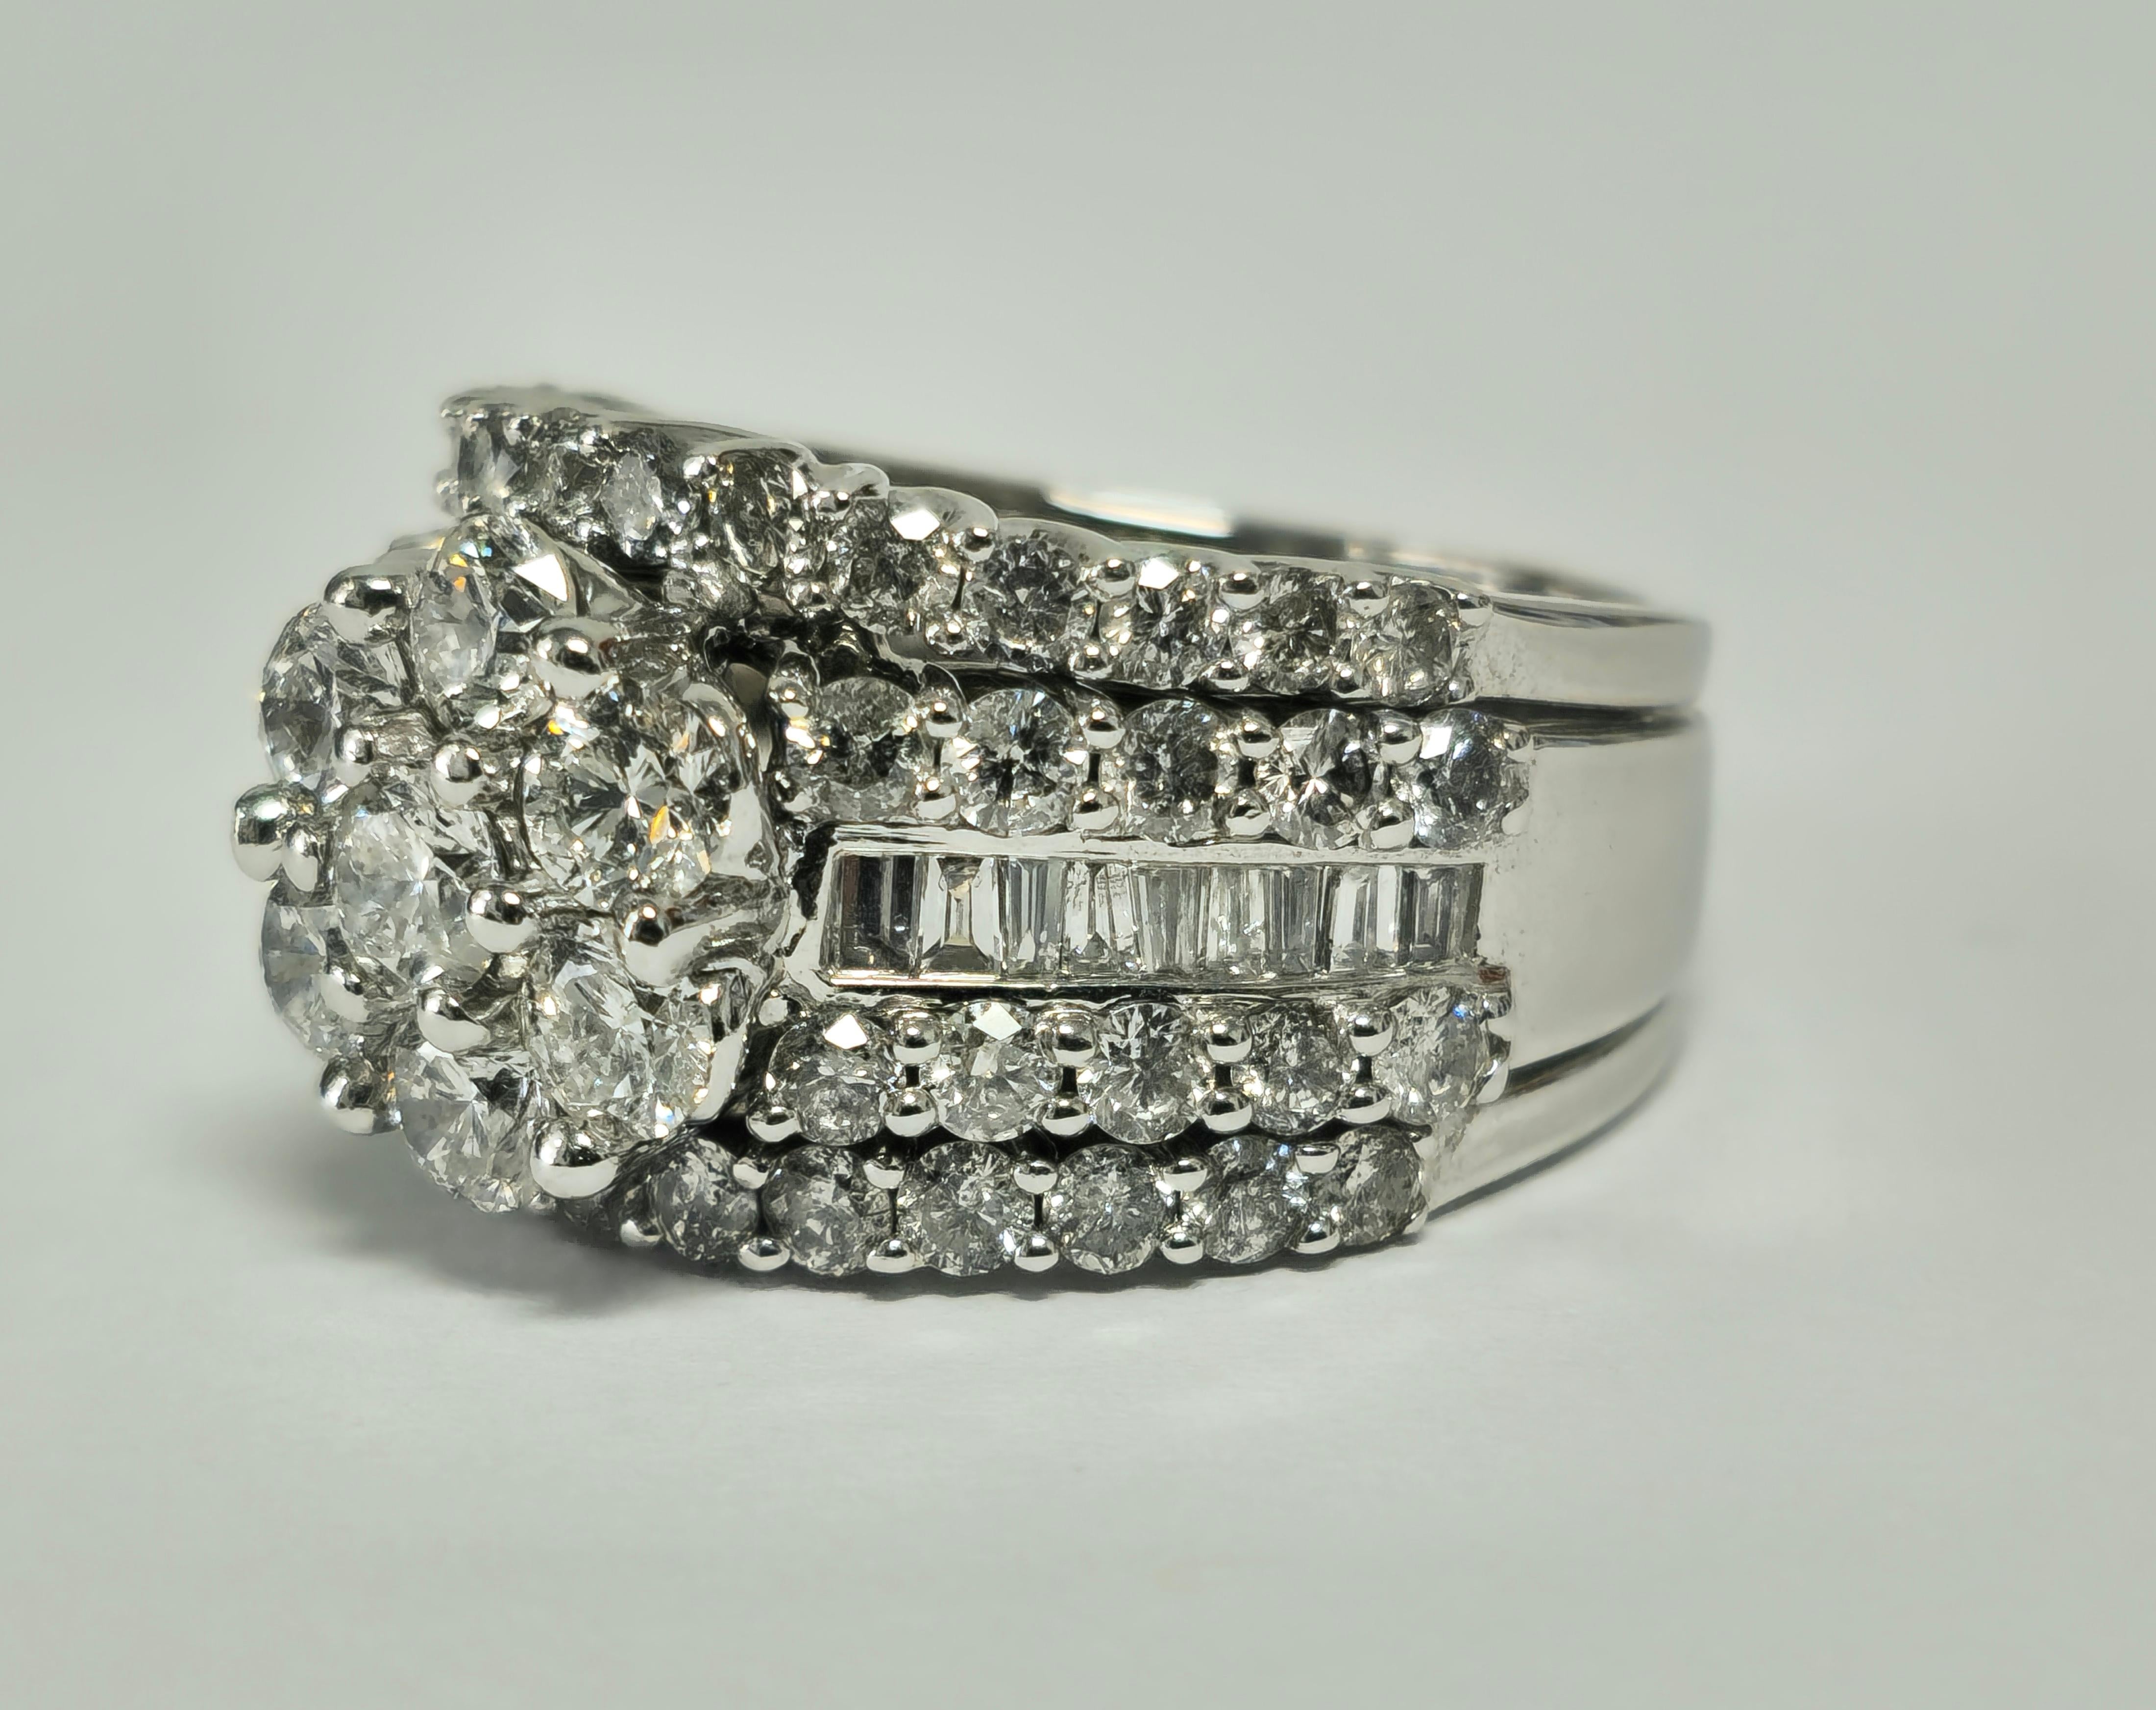 From solid 14k white gold, this stunning ring features a total carat weight of 3.75cts, showcasing a combination of round brilliant and baguette cut diamonds set in prongs or channel setting. With diamonds boasting VS-SI clarity and G color, the